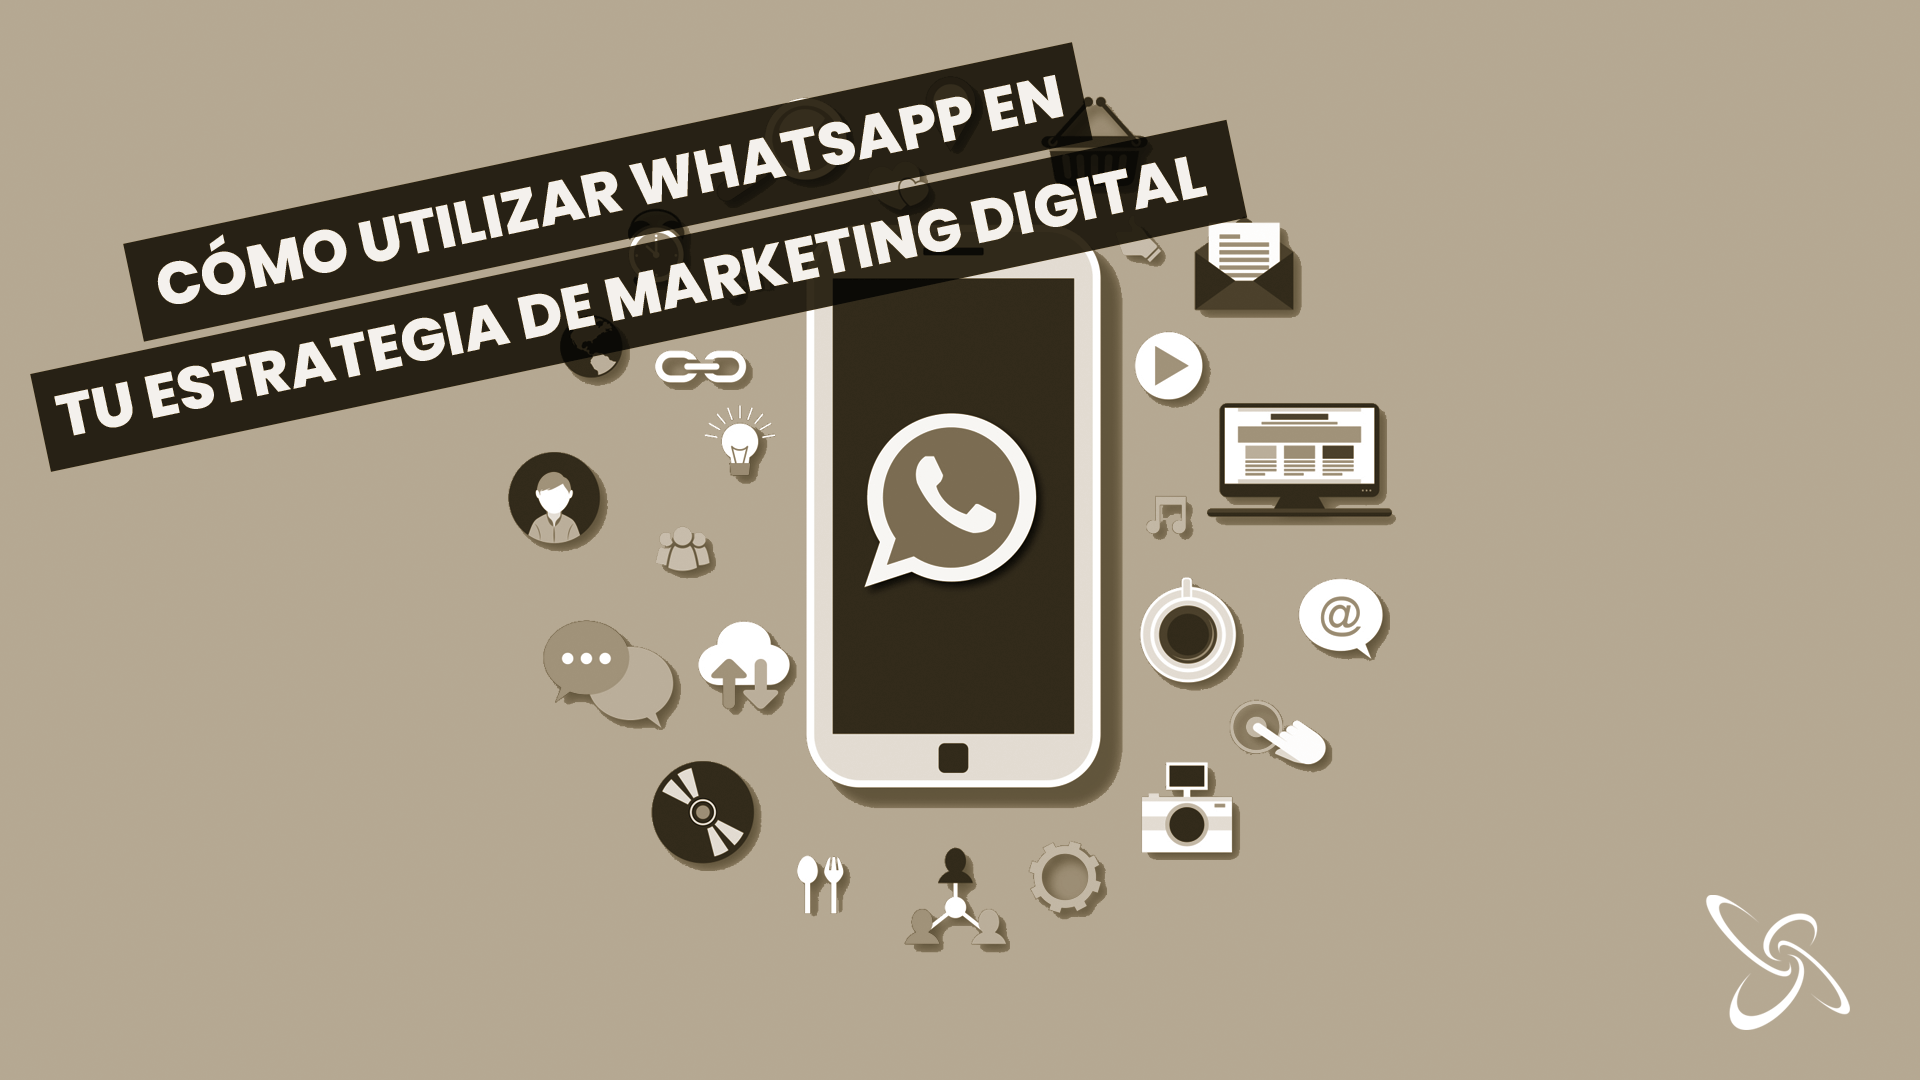 How to use WhatsApp in your digital marketing strategy